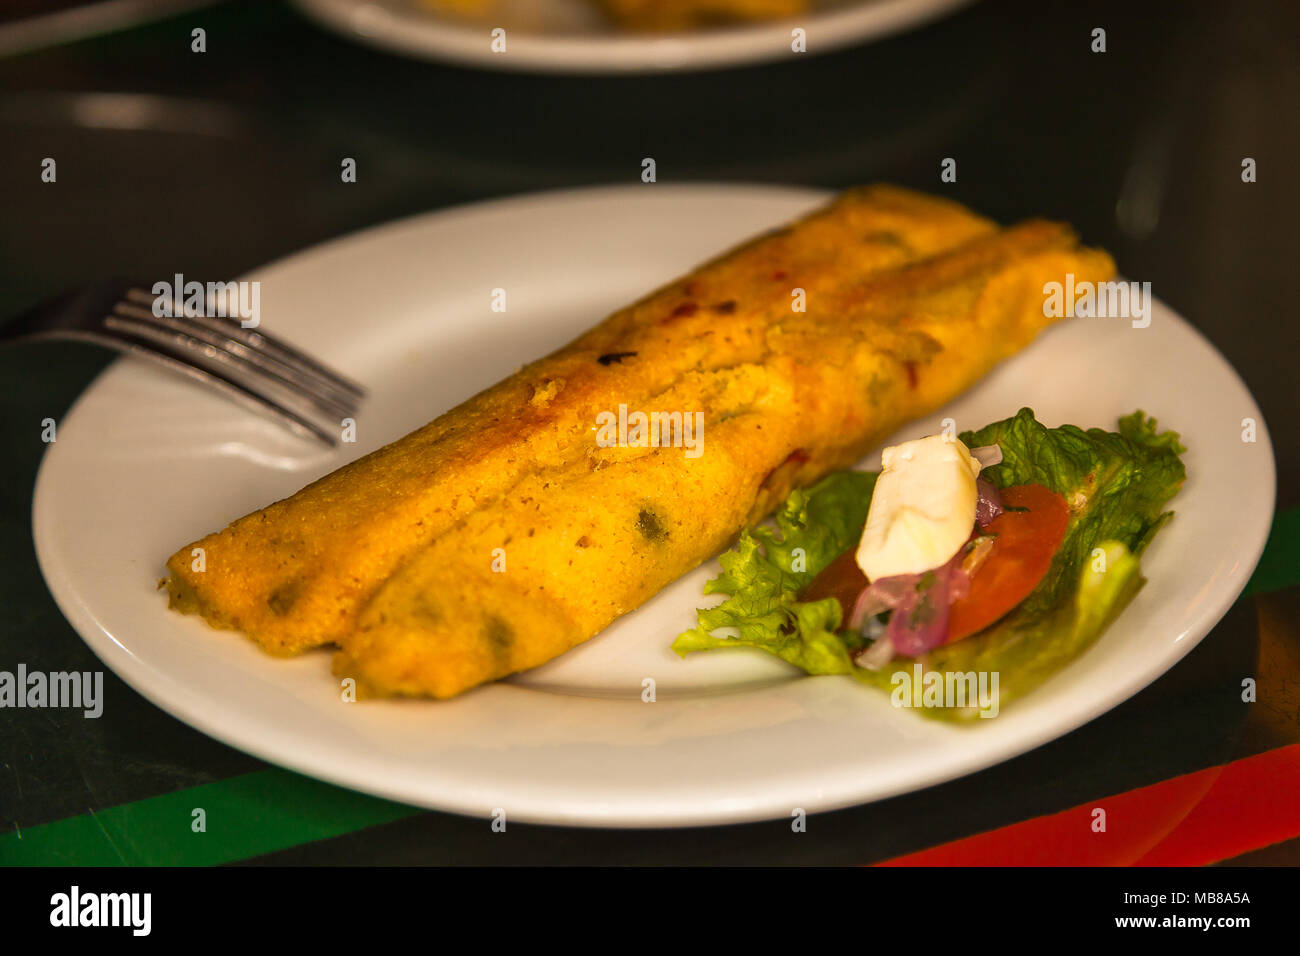 Tamales lojanos. Yellow corn cake served on a white plate with lettuce and tomato Stock Photo